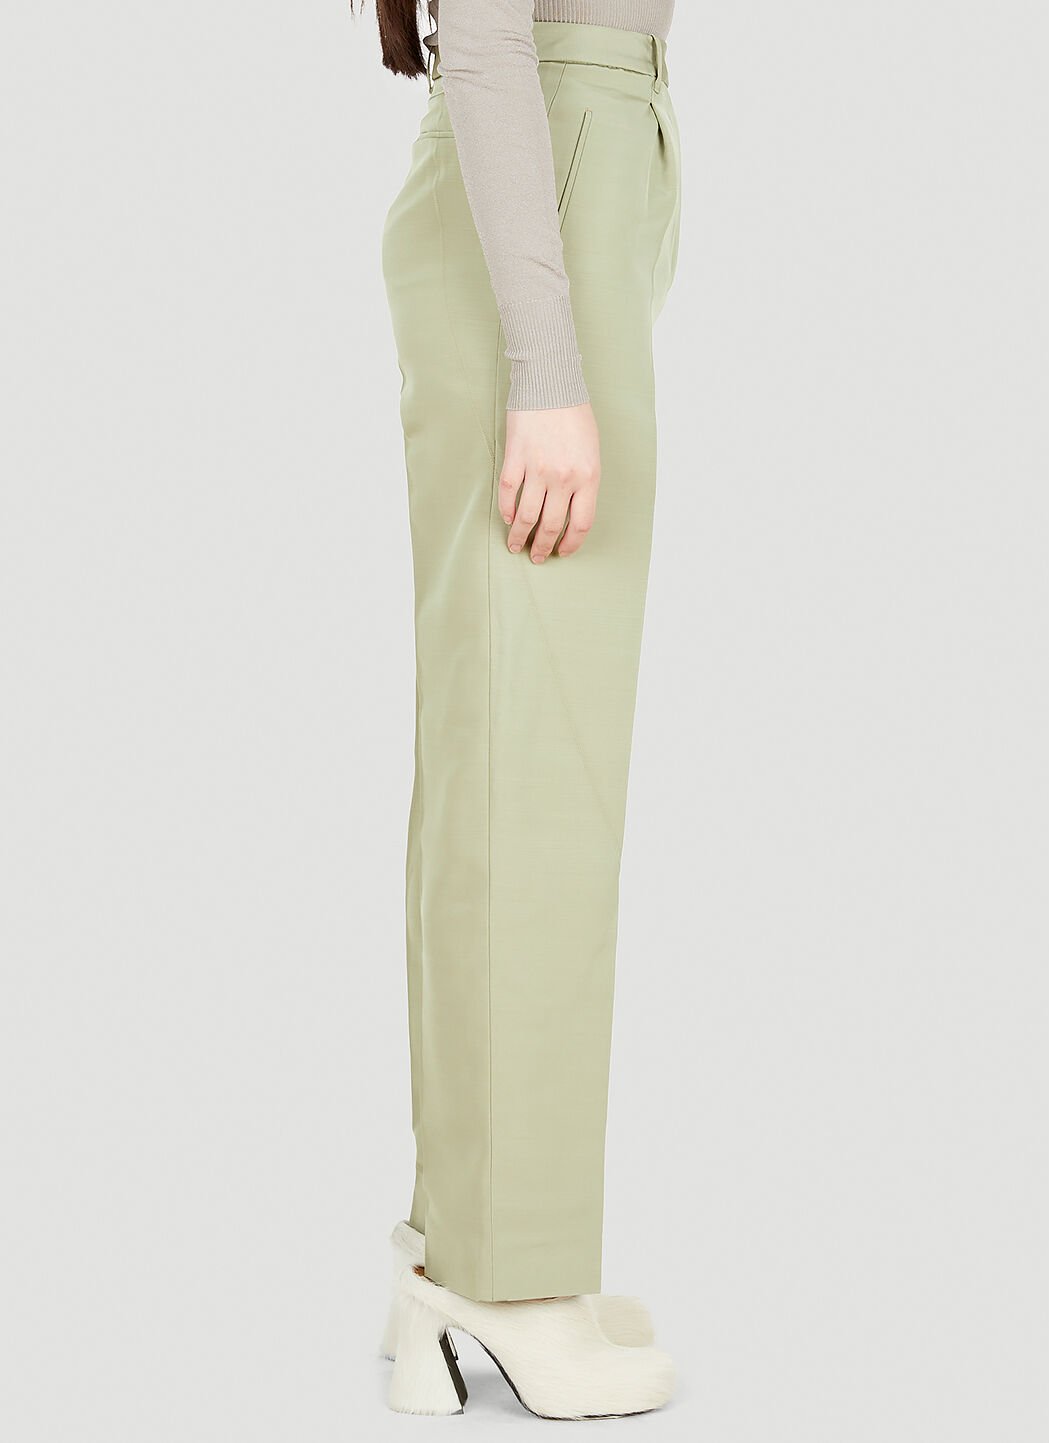 peter do ss22 TWISTED SEAM PANTS